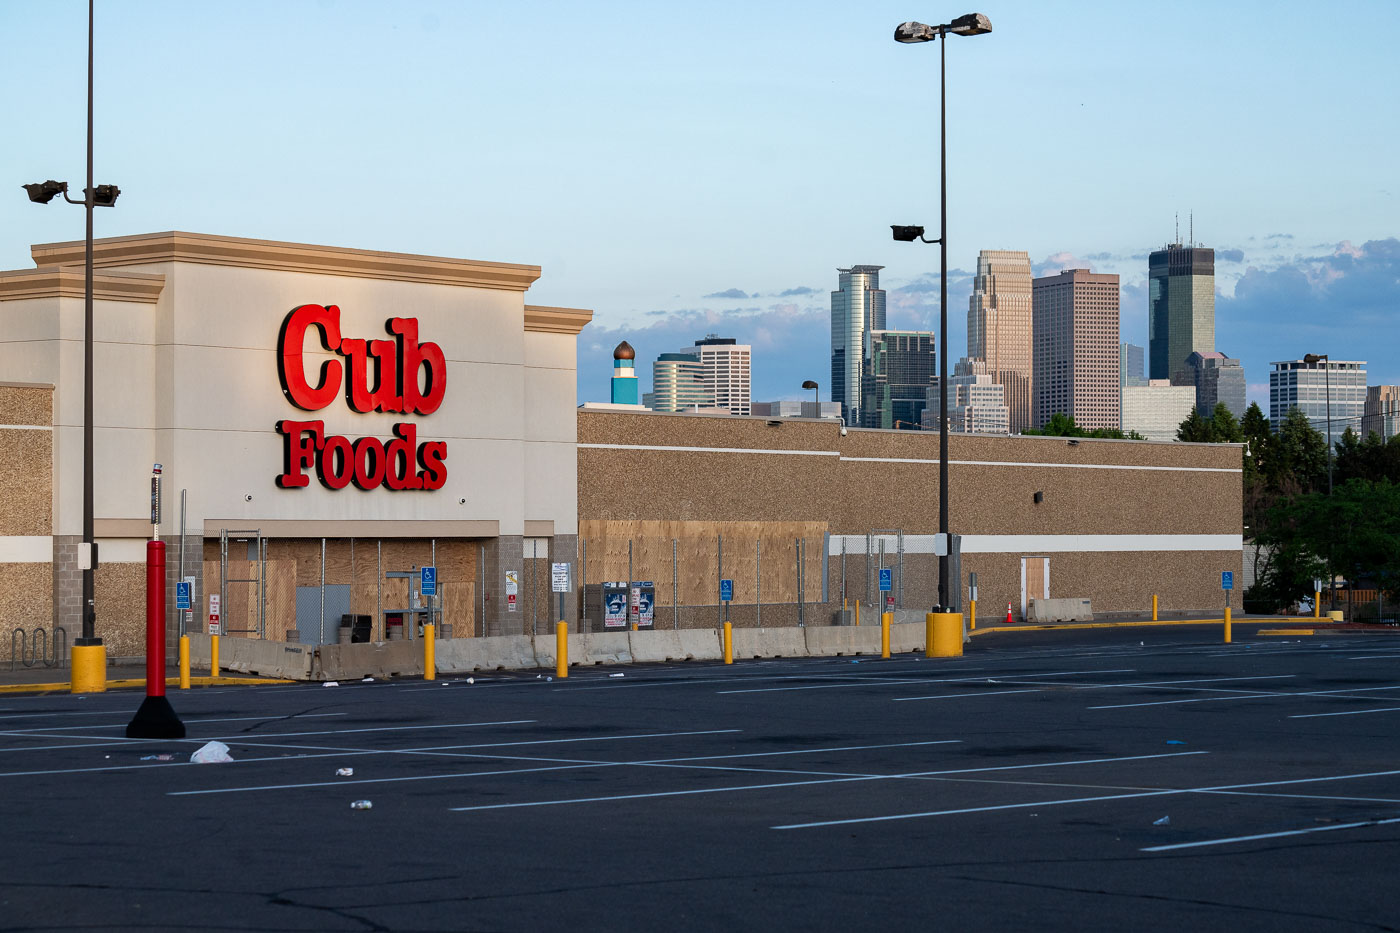 Cub Foods and downtown Minneapolis skyline